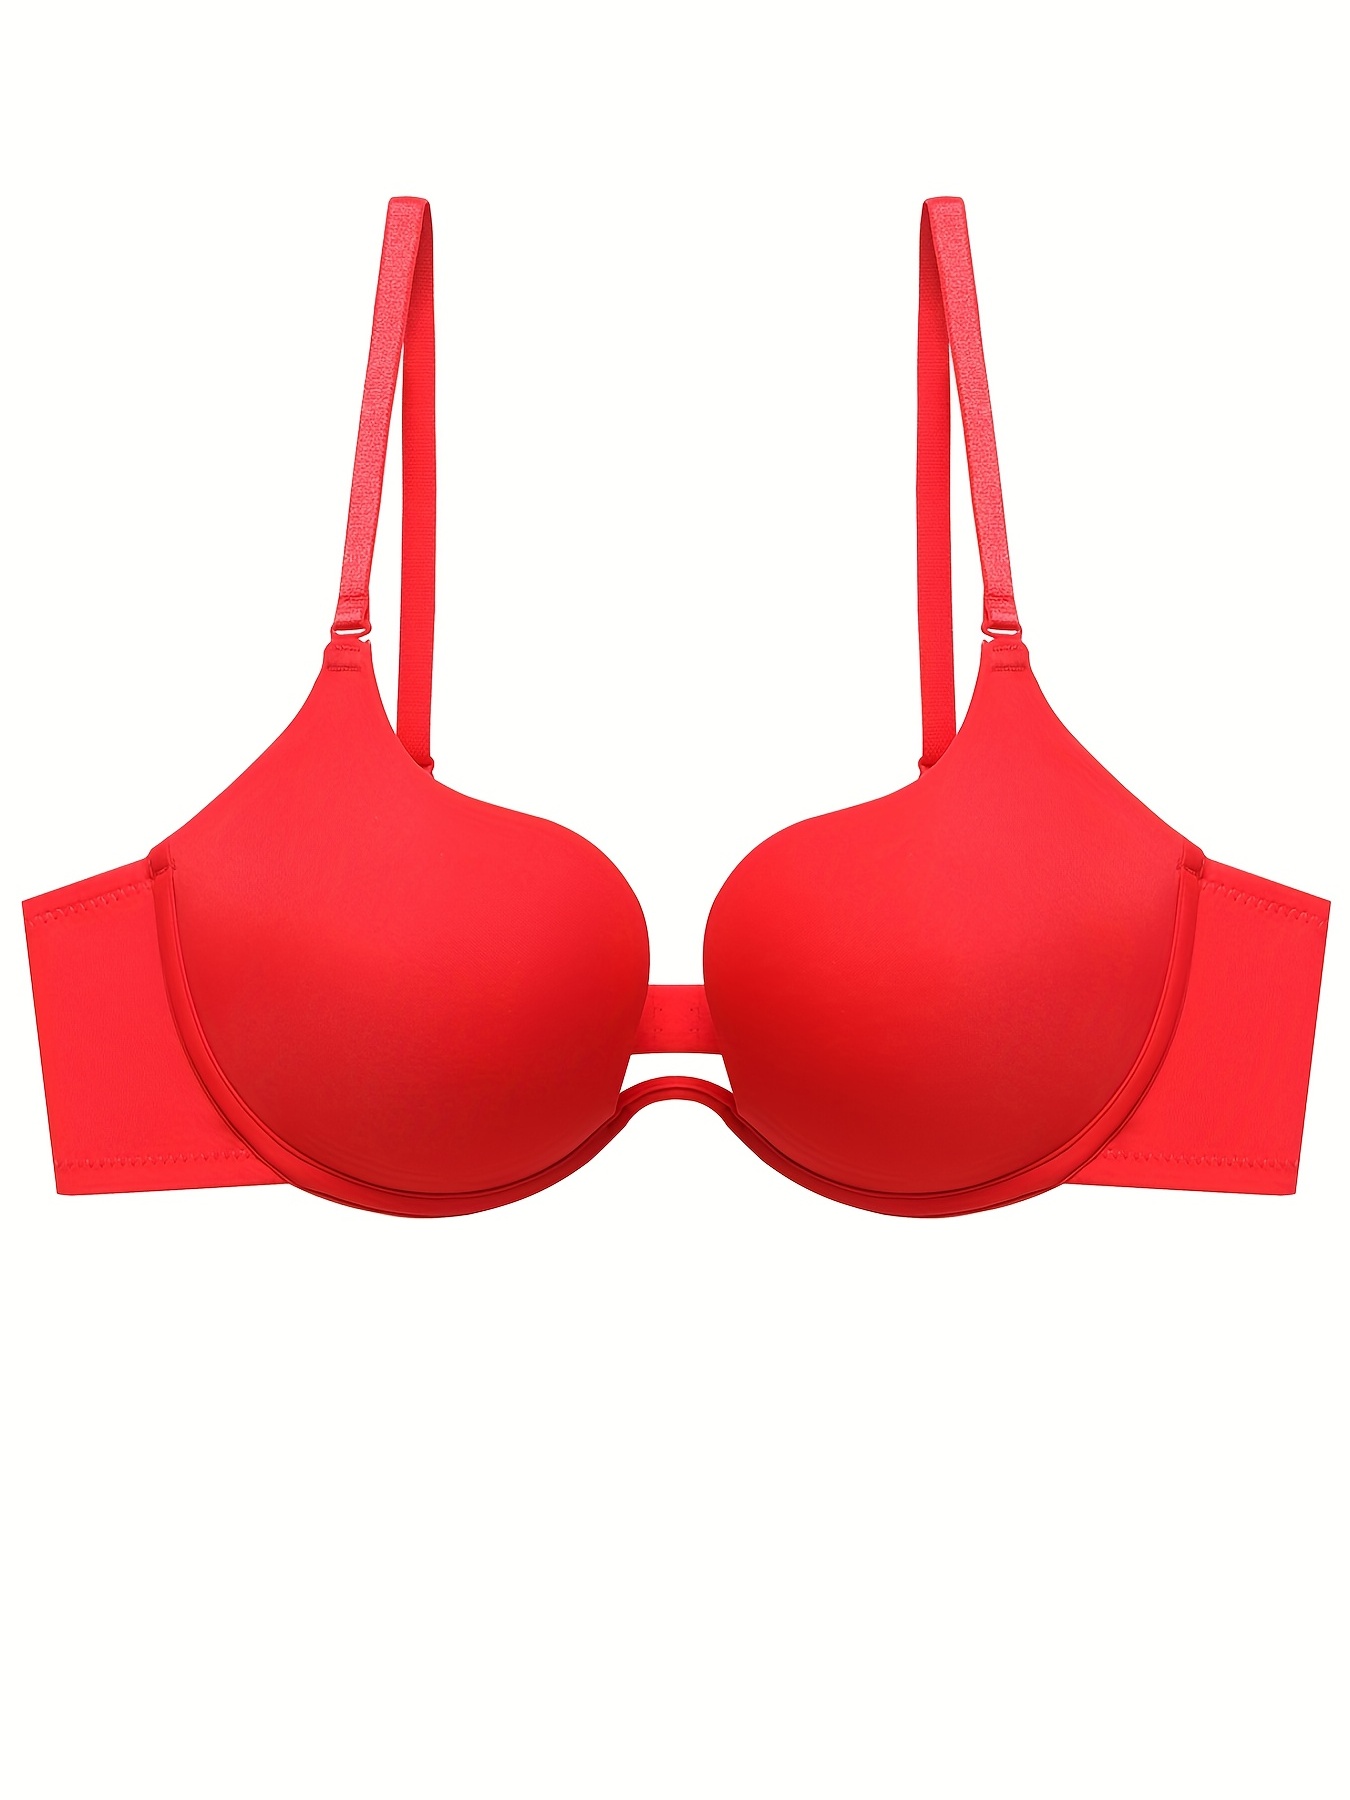 POTETI Red Bras for Women Full Cup Everyday Cozy No Underwire T shirt Bed  Unpadded Beauty Back Brassiere,44-100BC 